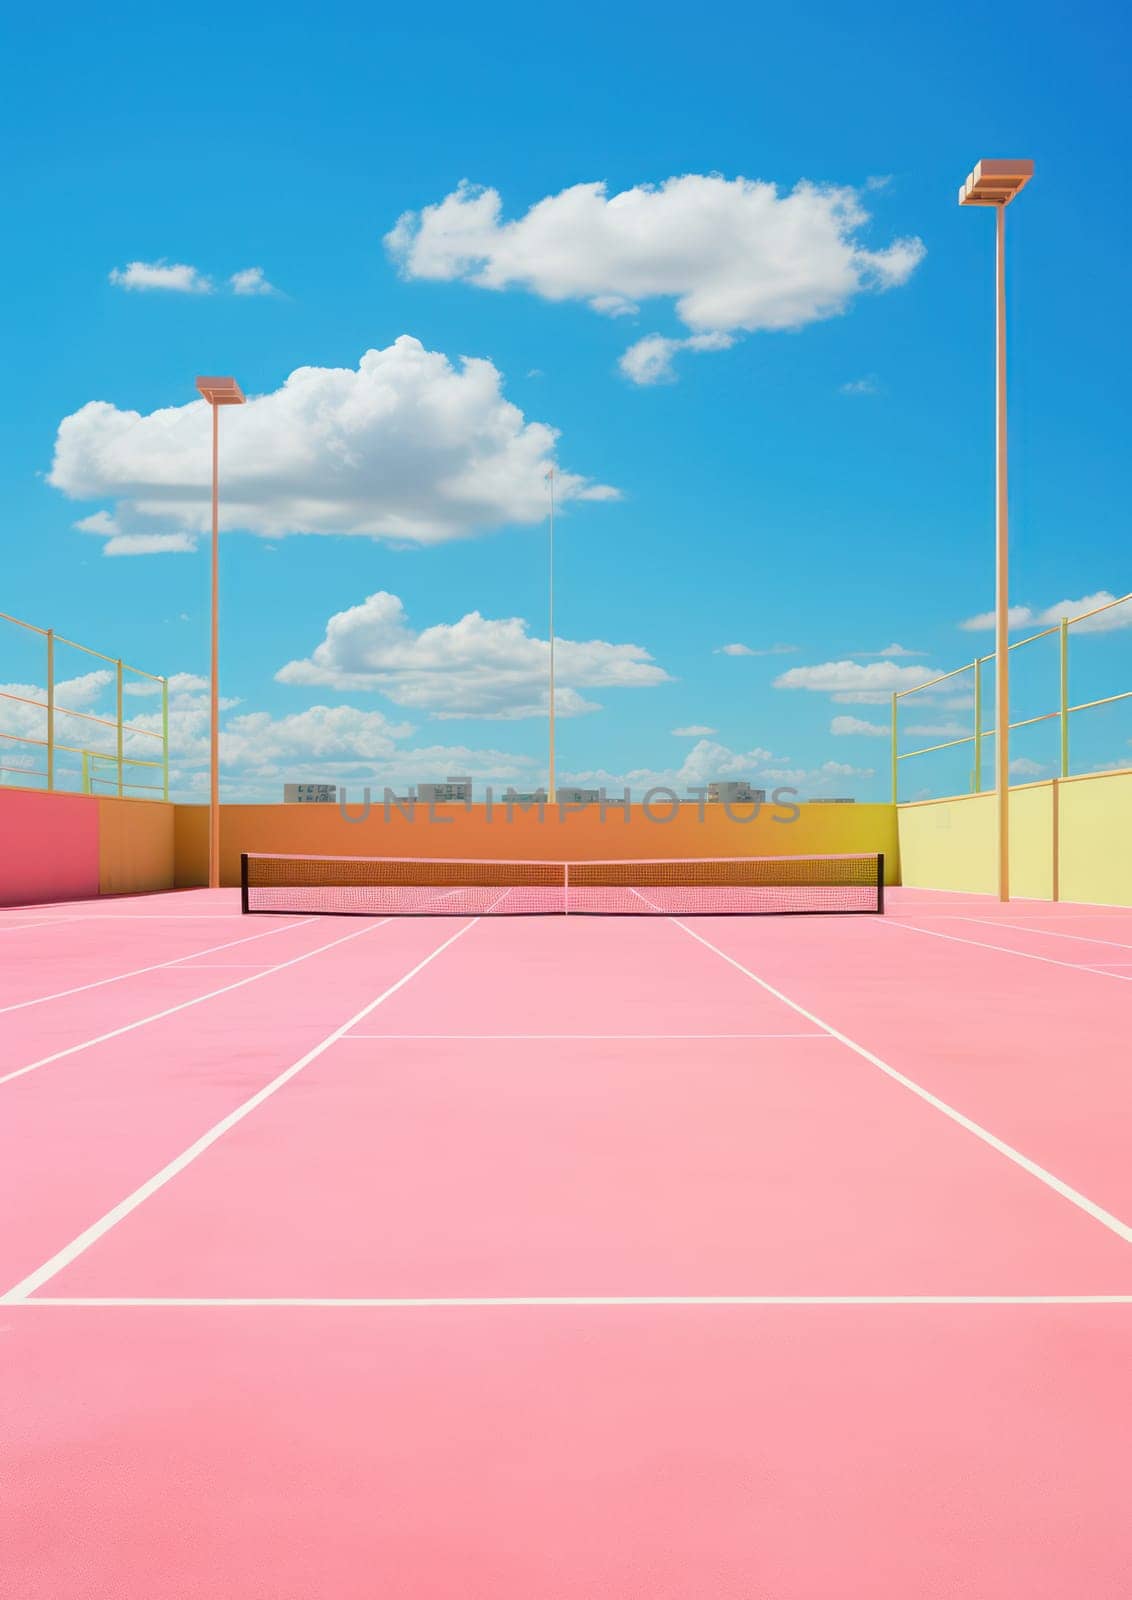 Active Fun on Green: Tennis Court Competition in a Summer Stadium